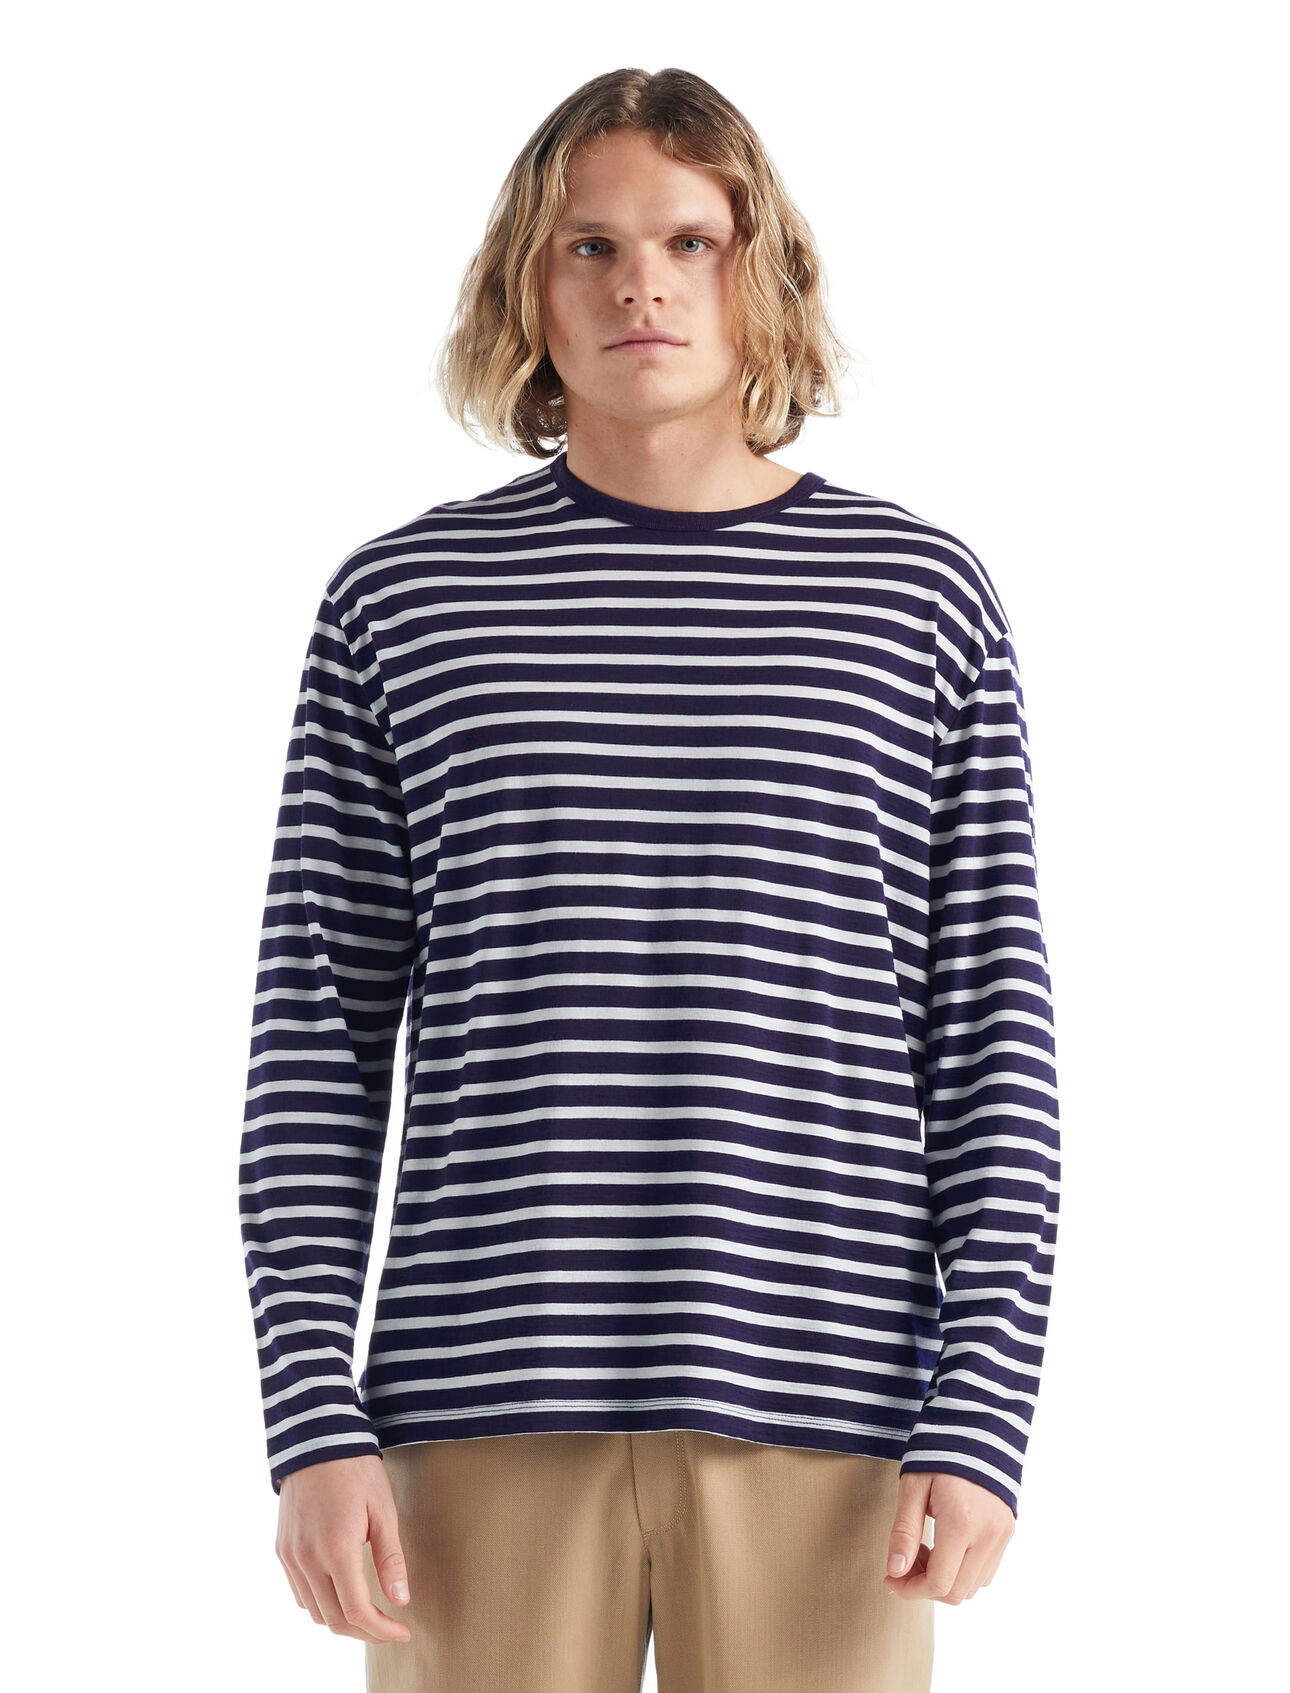 Mens Merino Granary Long Sleeve Stripe T-Shirt A classic striped tee with a relaxed fit and soft, breathable, 100% merino wool fabric, the Granary Long Sleeve Tee Stripe is all about everyday, all-natural comfort. 